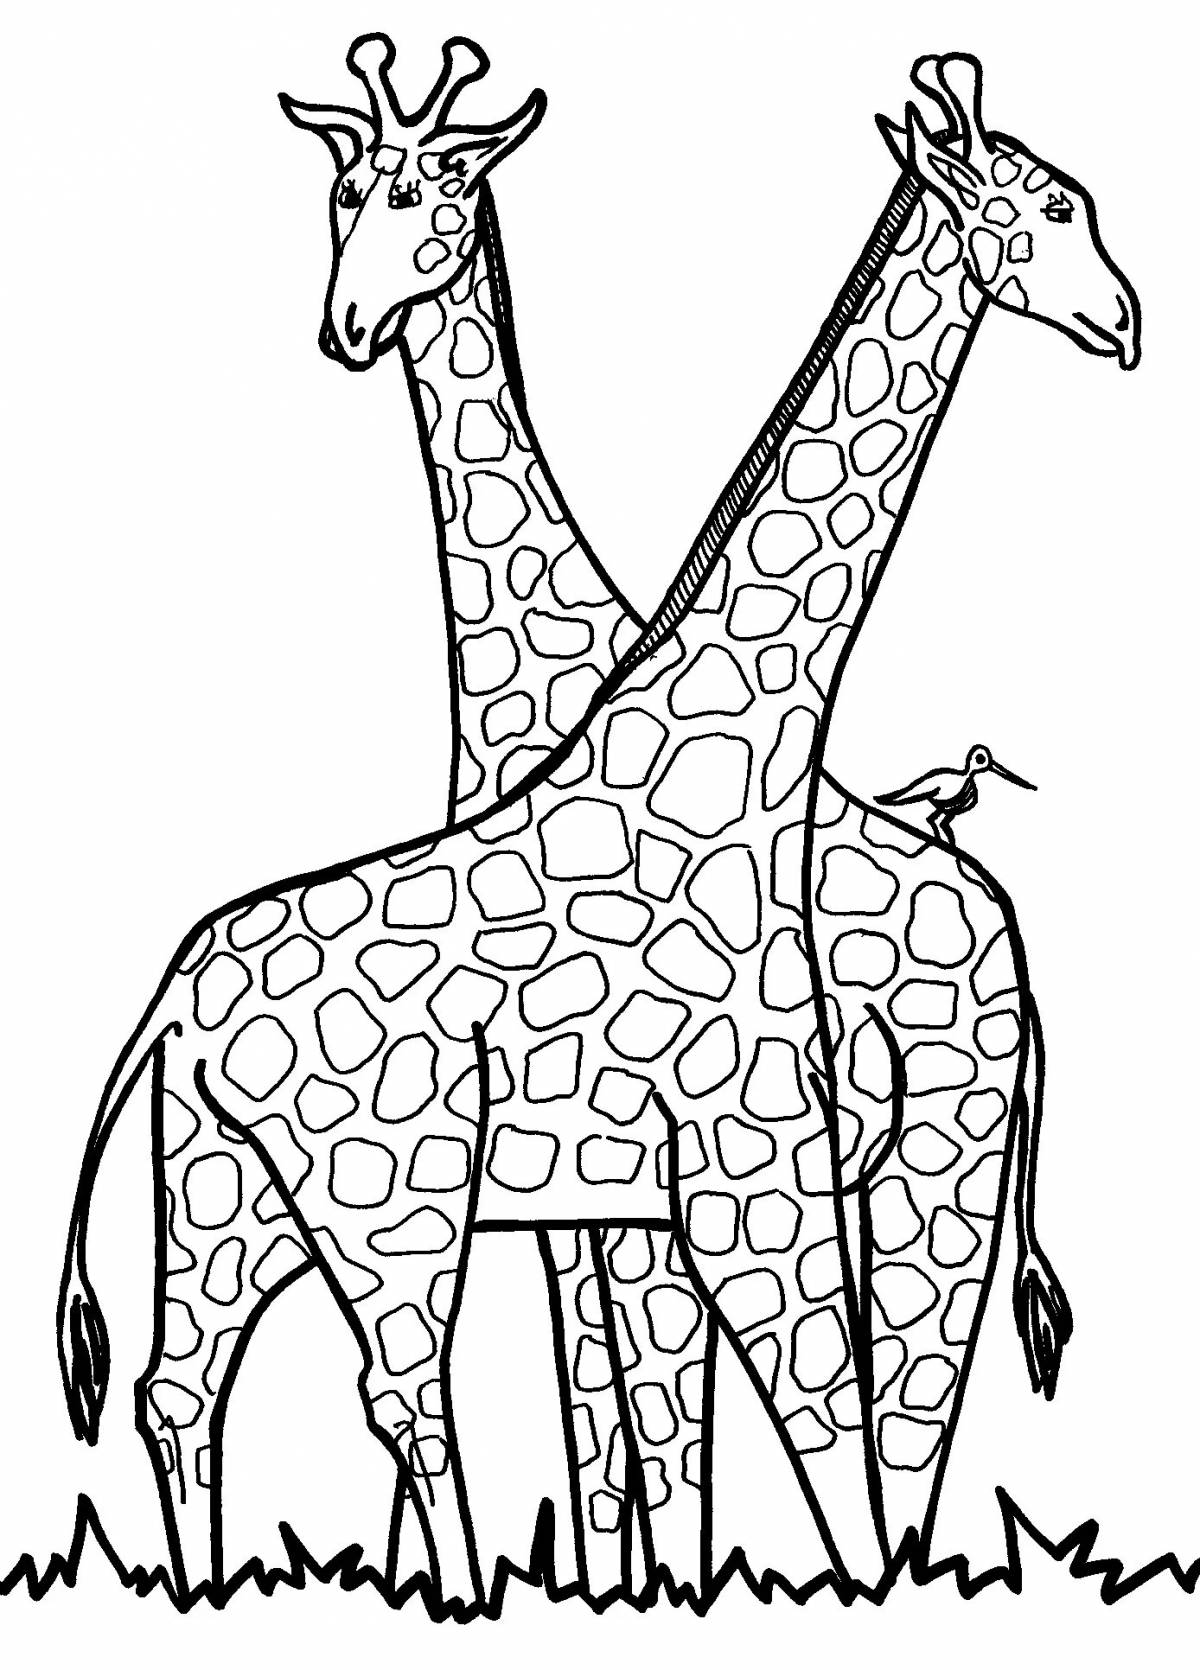 Exciting coloring giraffe